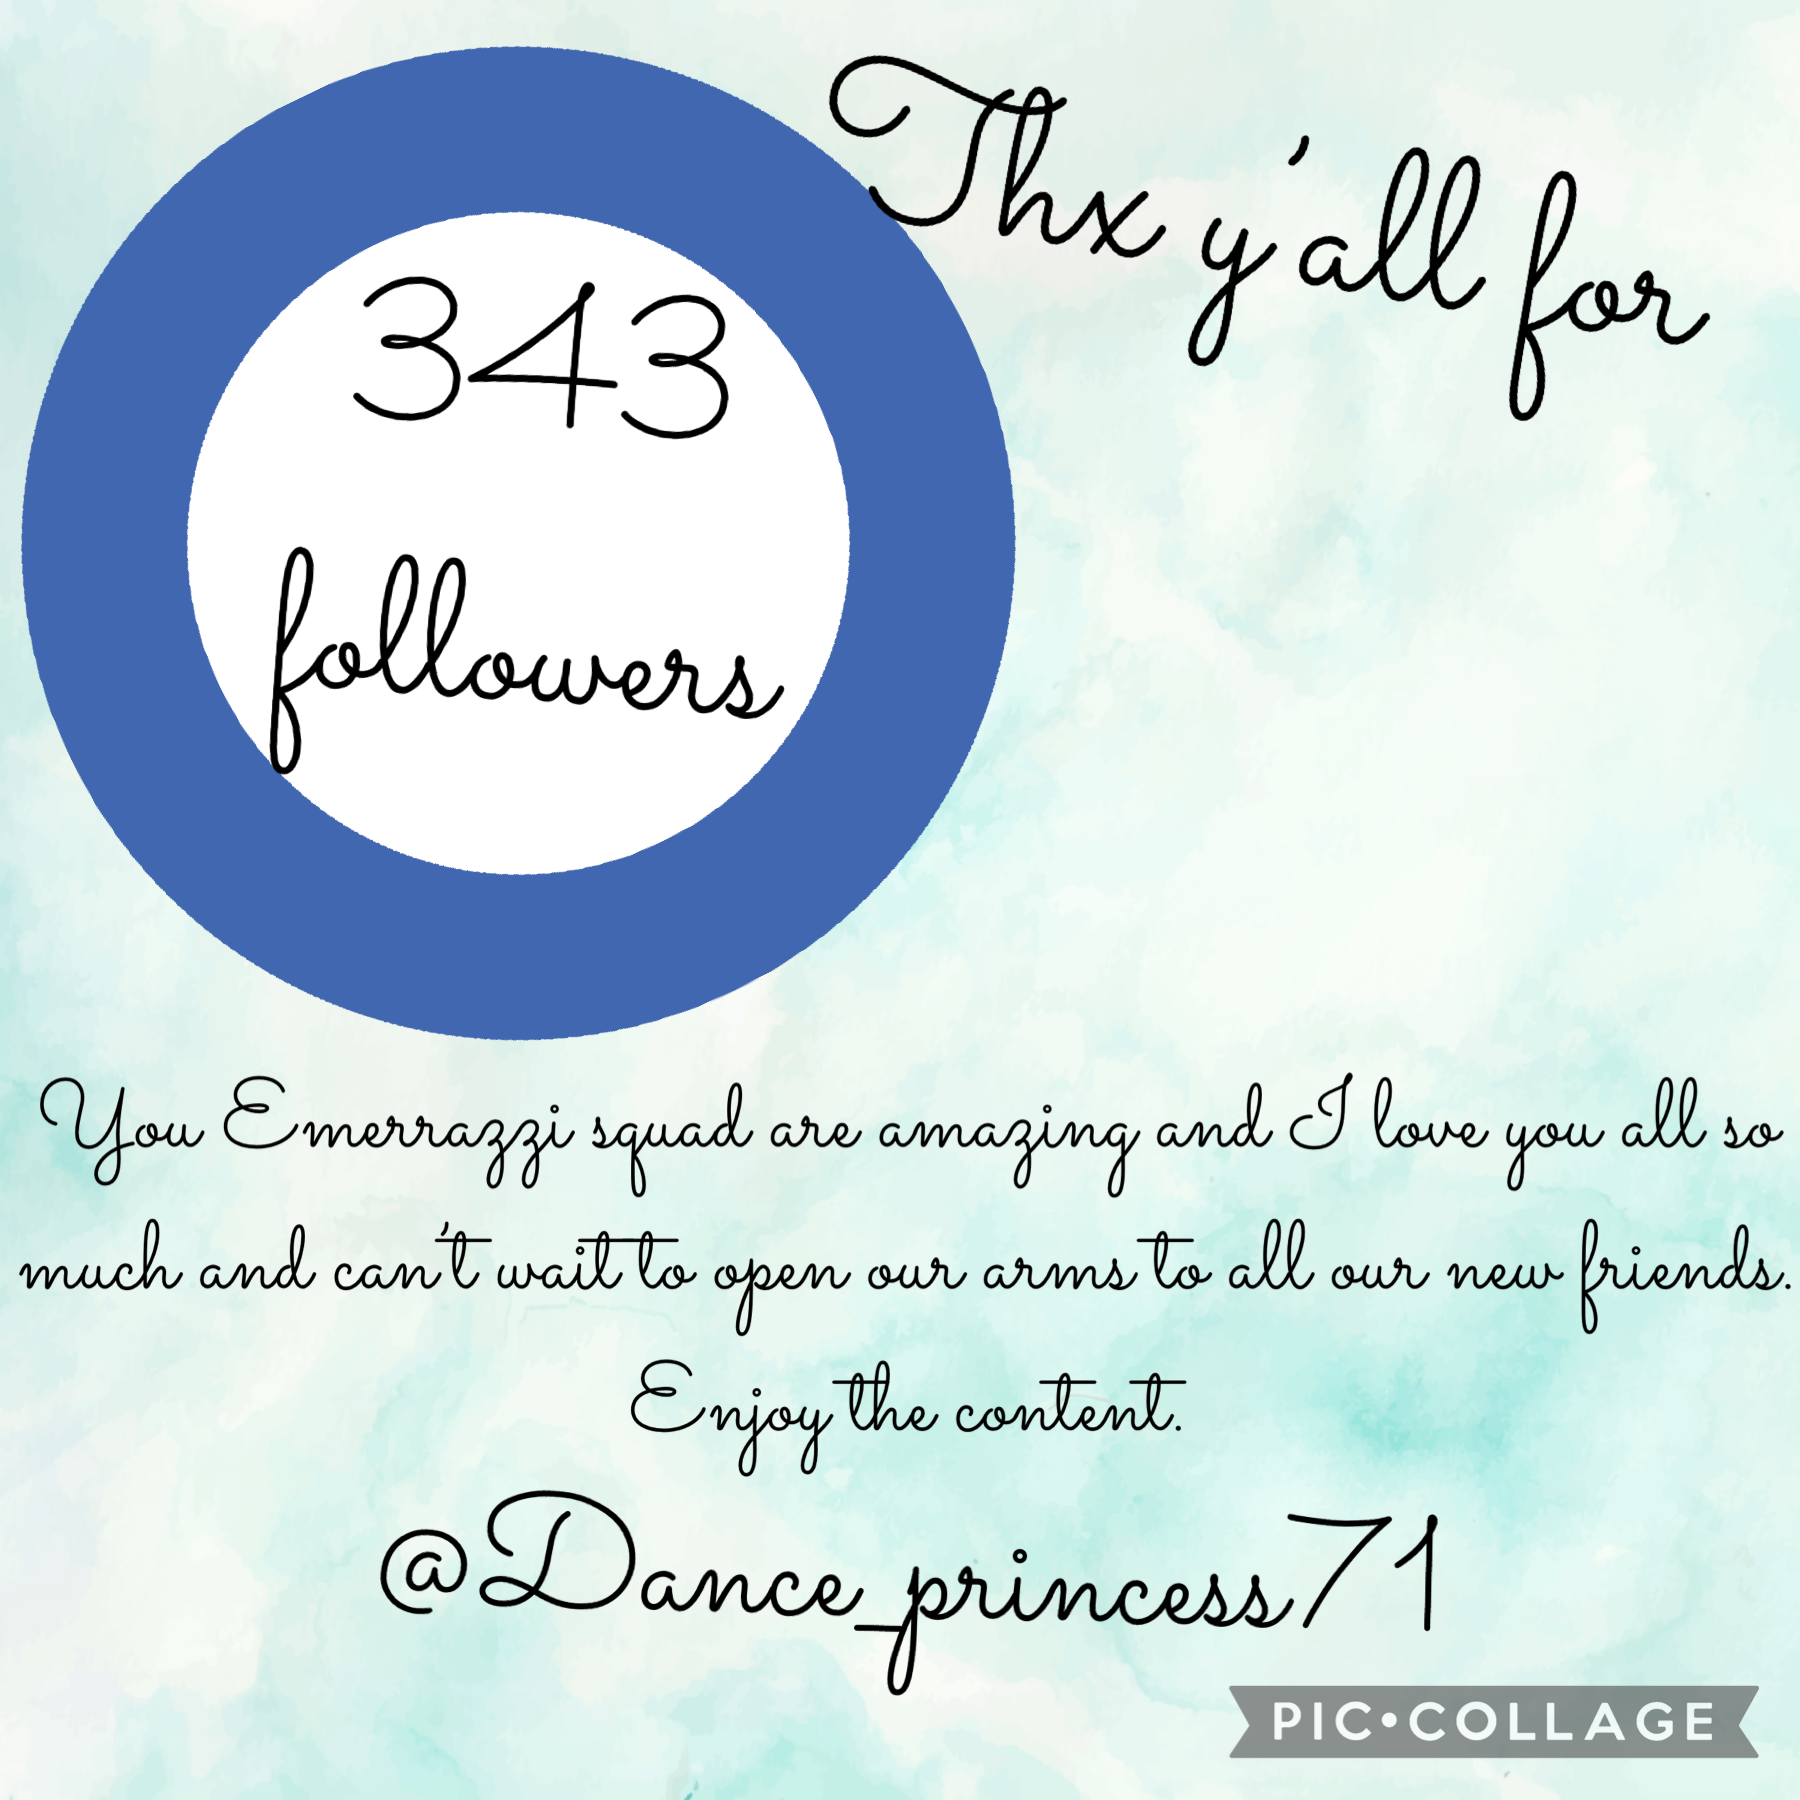 343 in our community ❤️ y’all all, @dance_princess71